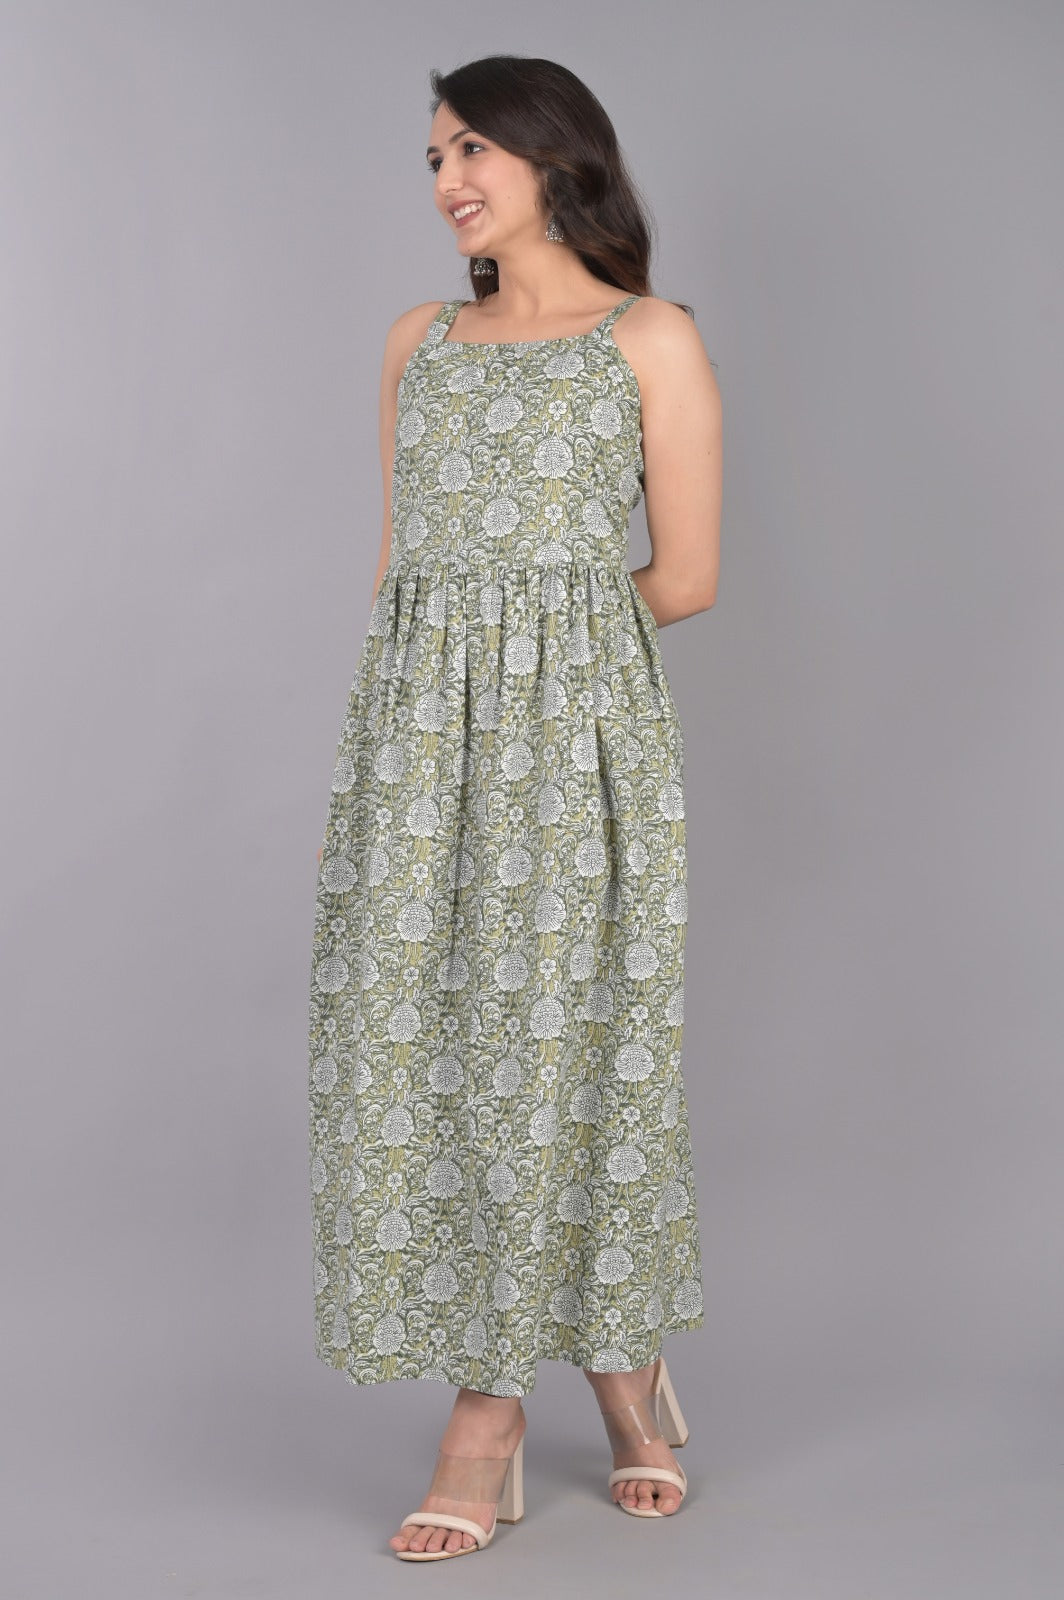 Green Cotton Printed Dress With Floral Motifs